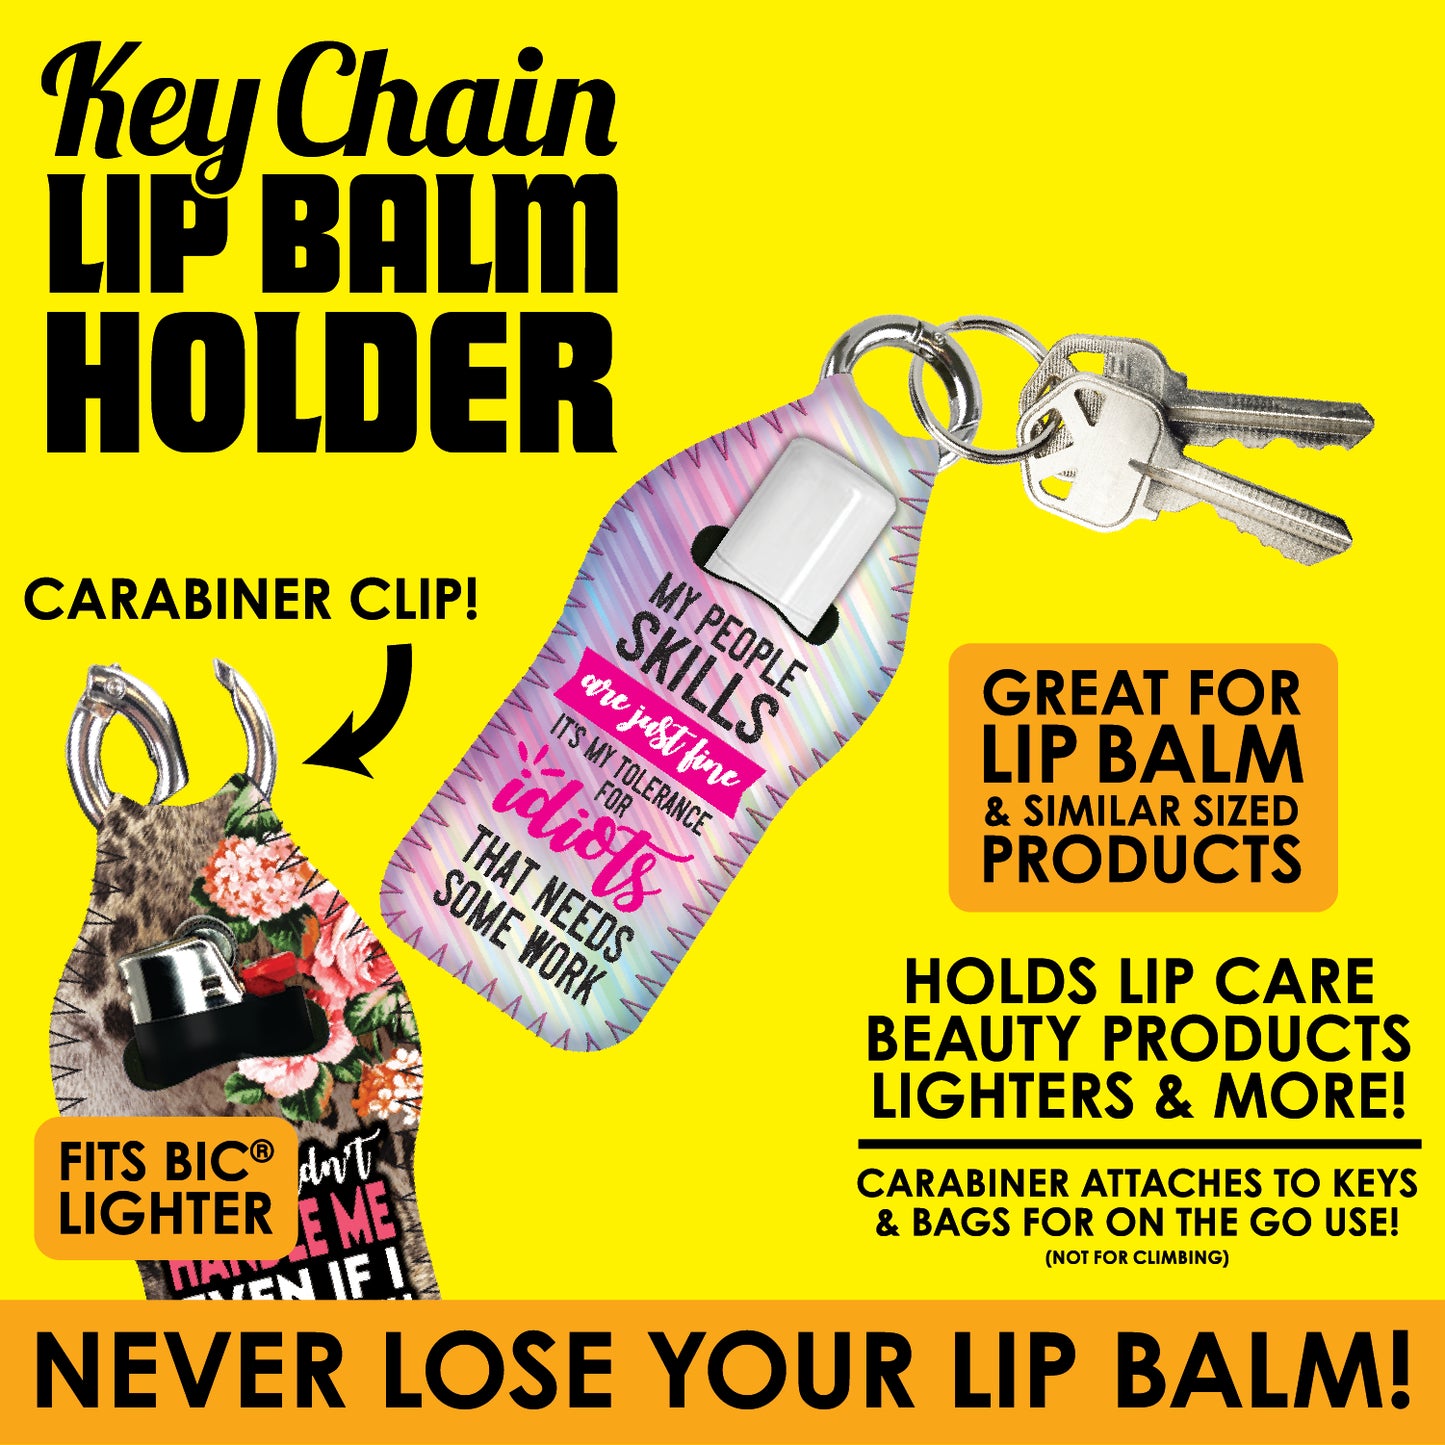 ITEM NUMBER 041544 KEY CHAIN LIP BALM HOLDER 12 PIECES PER DISPLAY